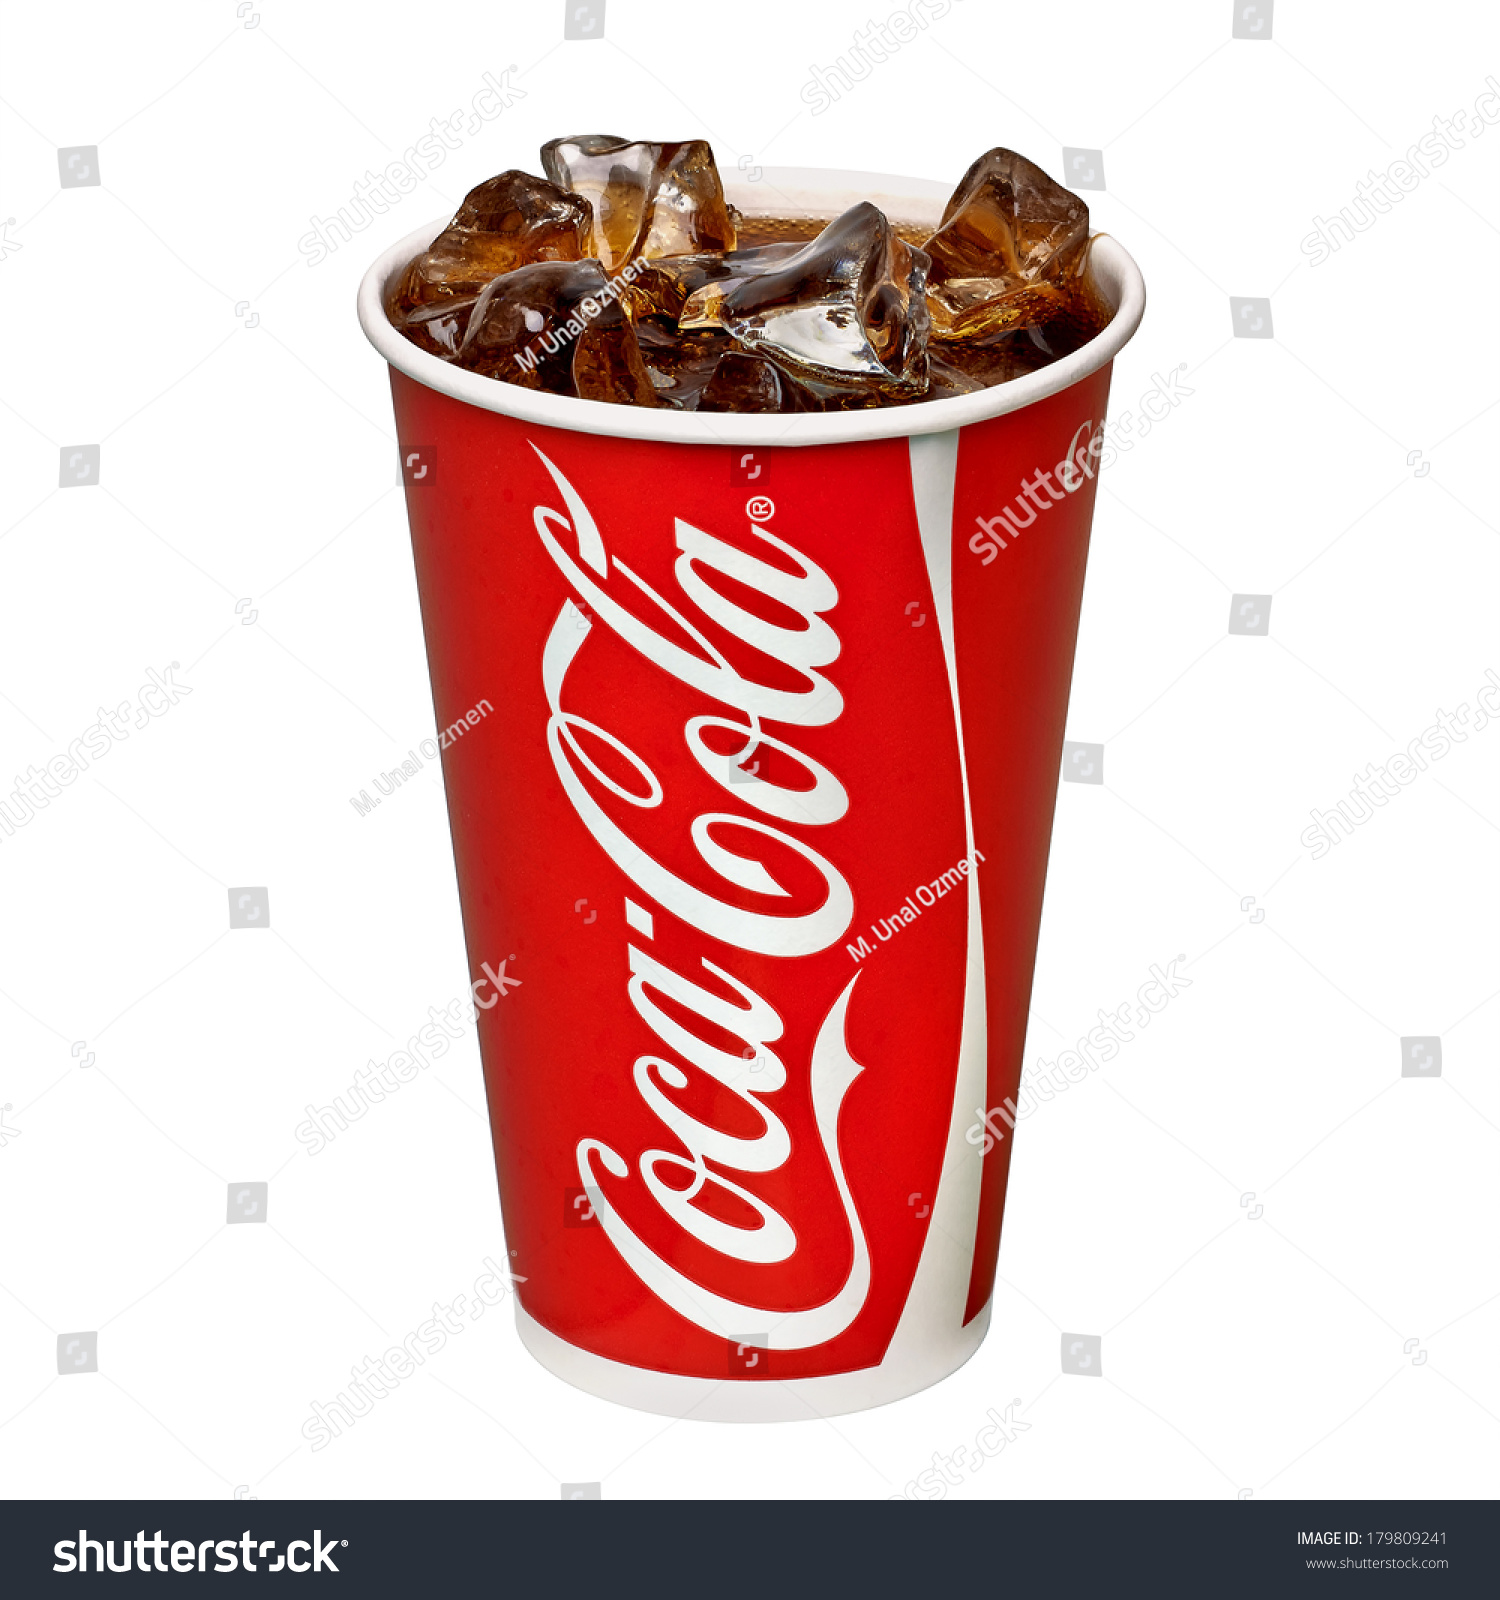 Editorial Photo Classic Cocacola Takeaway Cup Stock Photo 179809241 ...